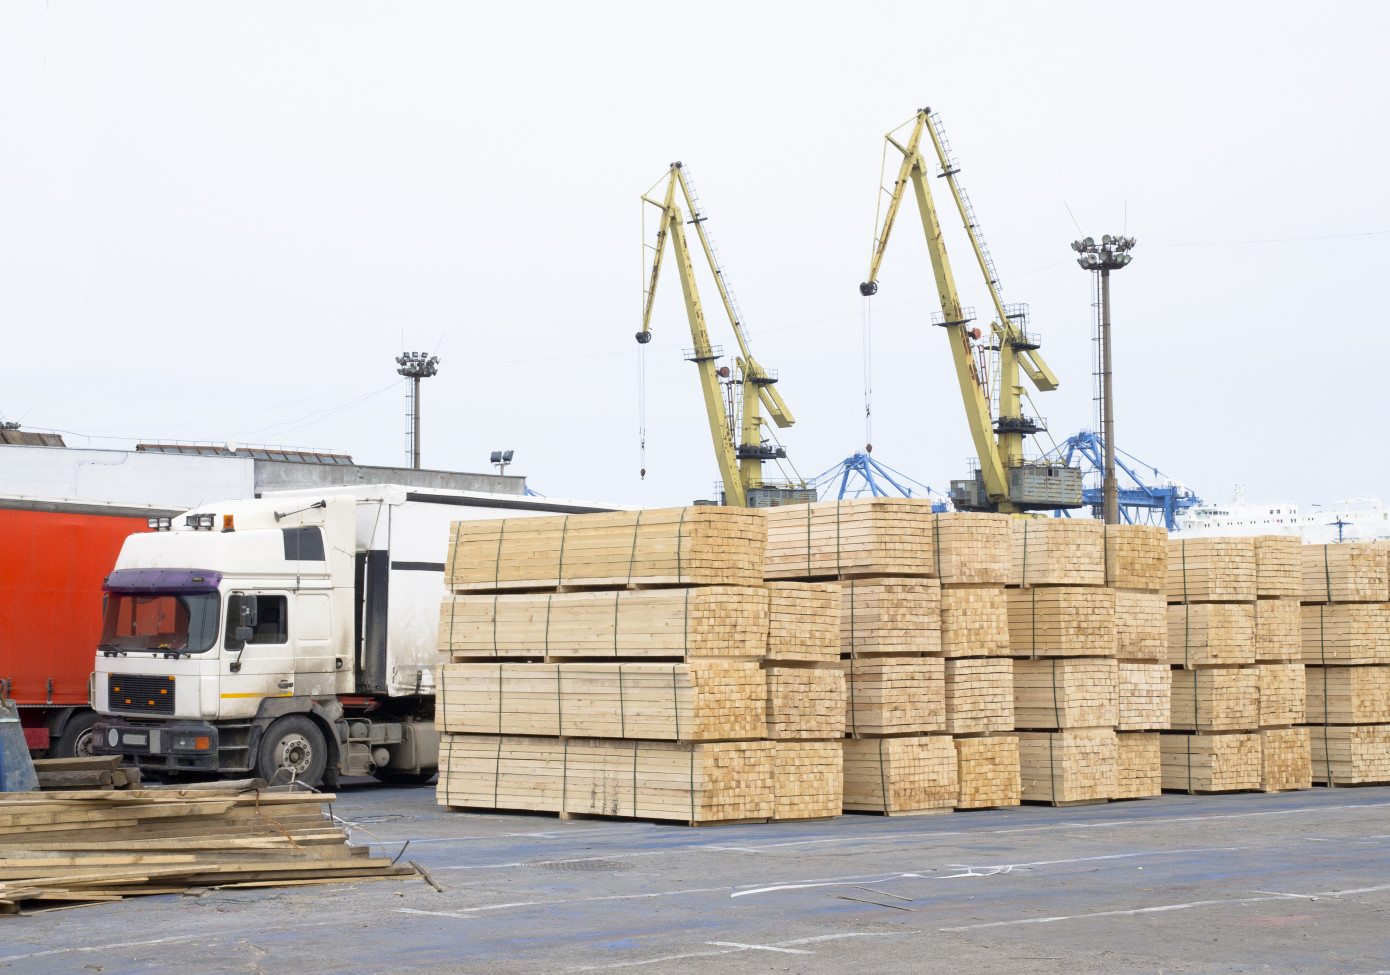 Russia surpasses Canada as world’s largest exporter of softwood lumber in 2019